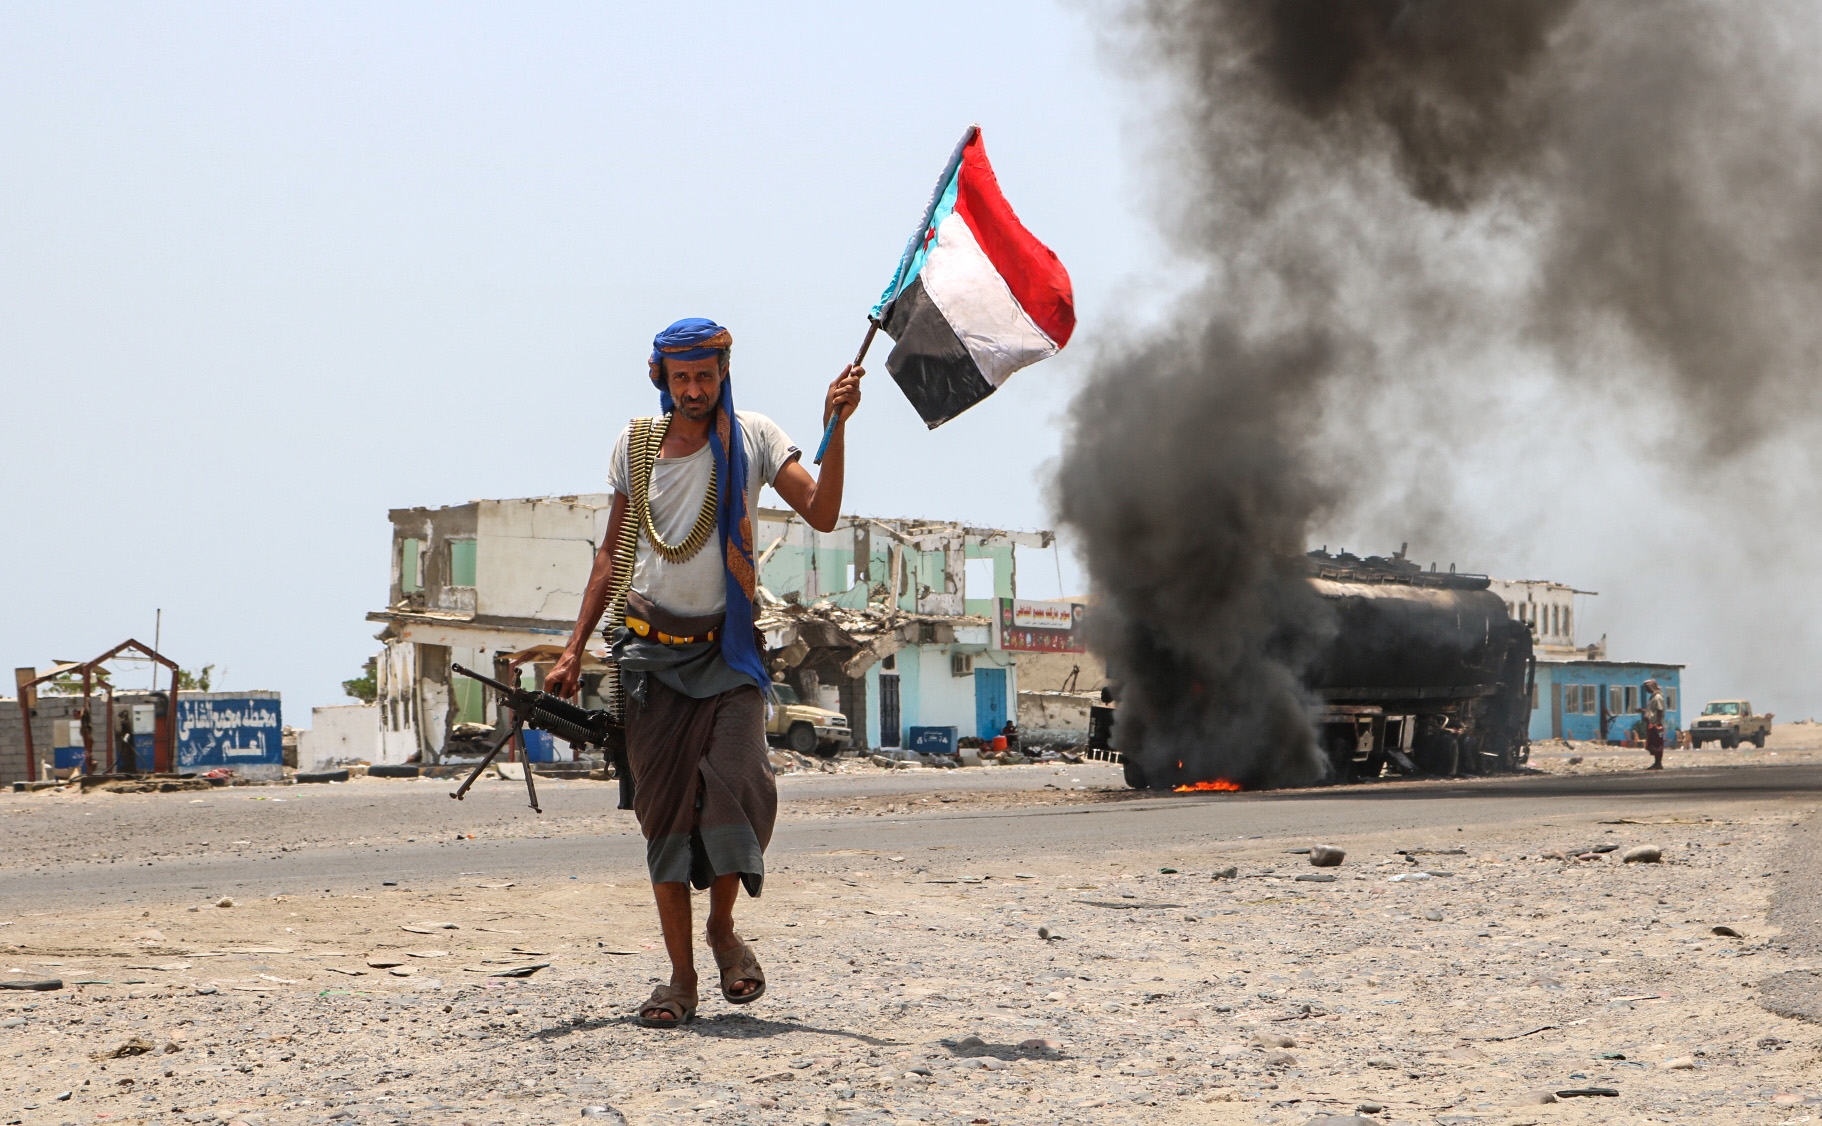 A fighter of the UAE-trained Security Belt Force walks with a separatist flag in southern Yemen (AFP/Nabil Hasan)